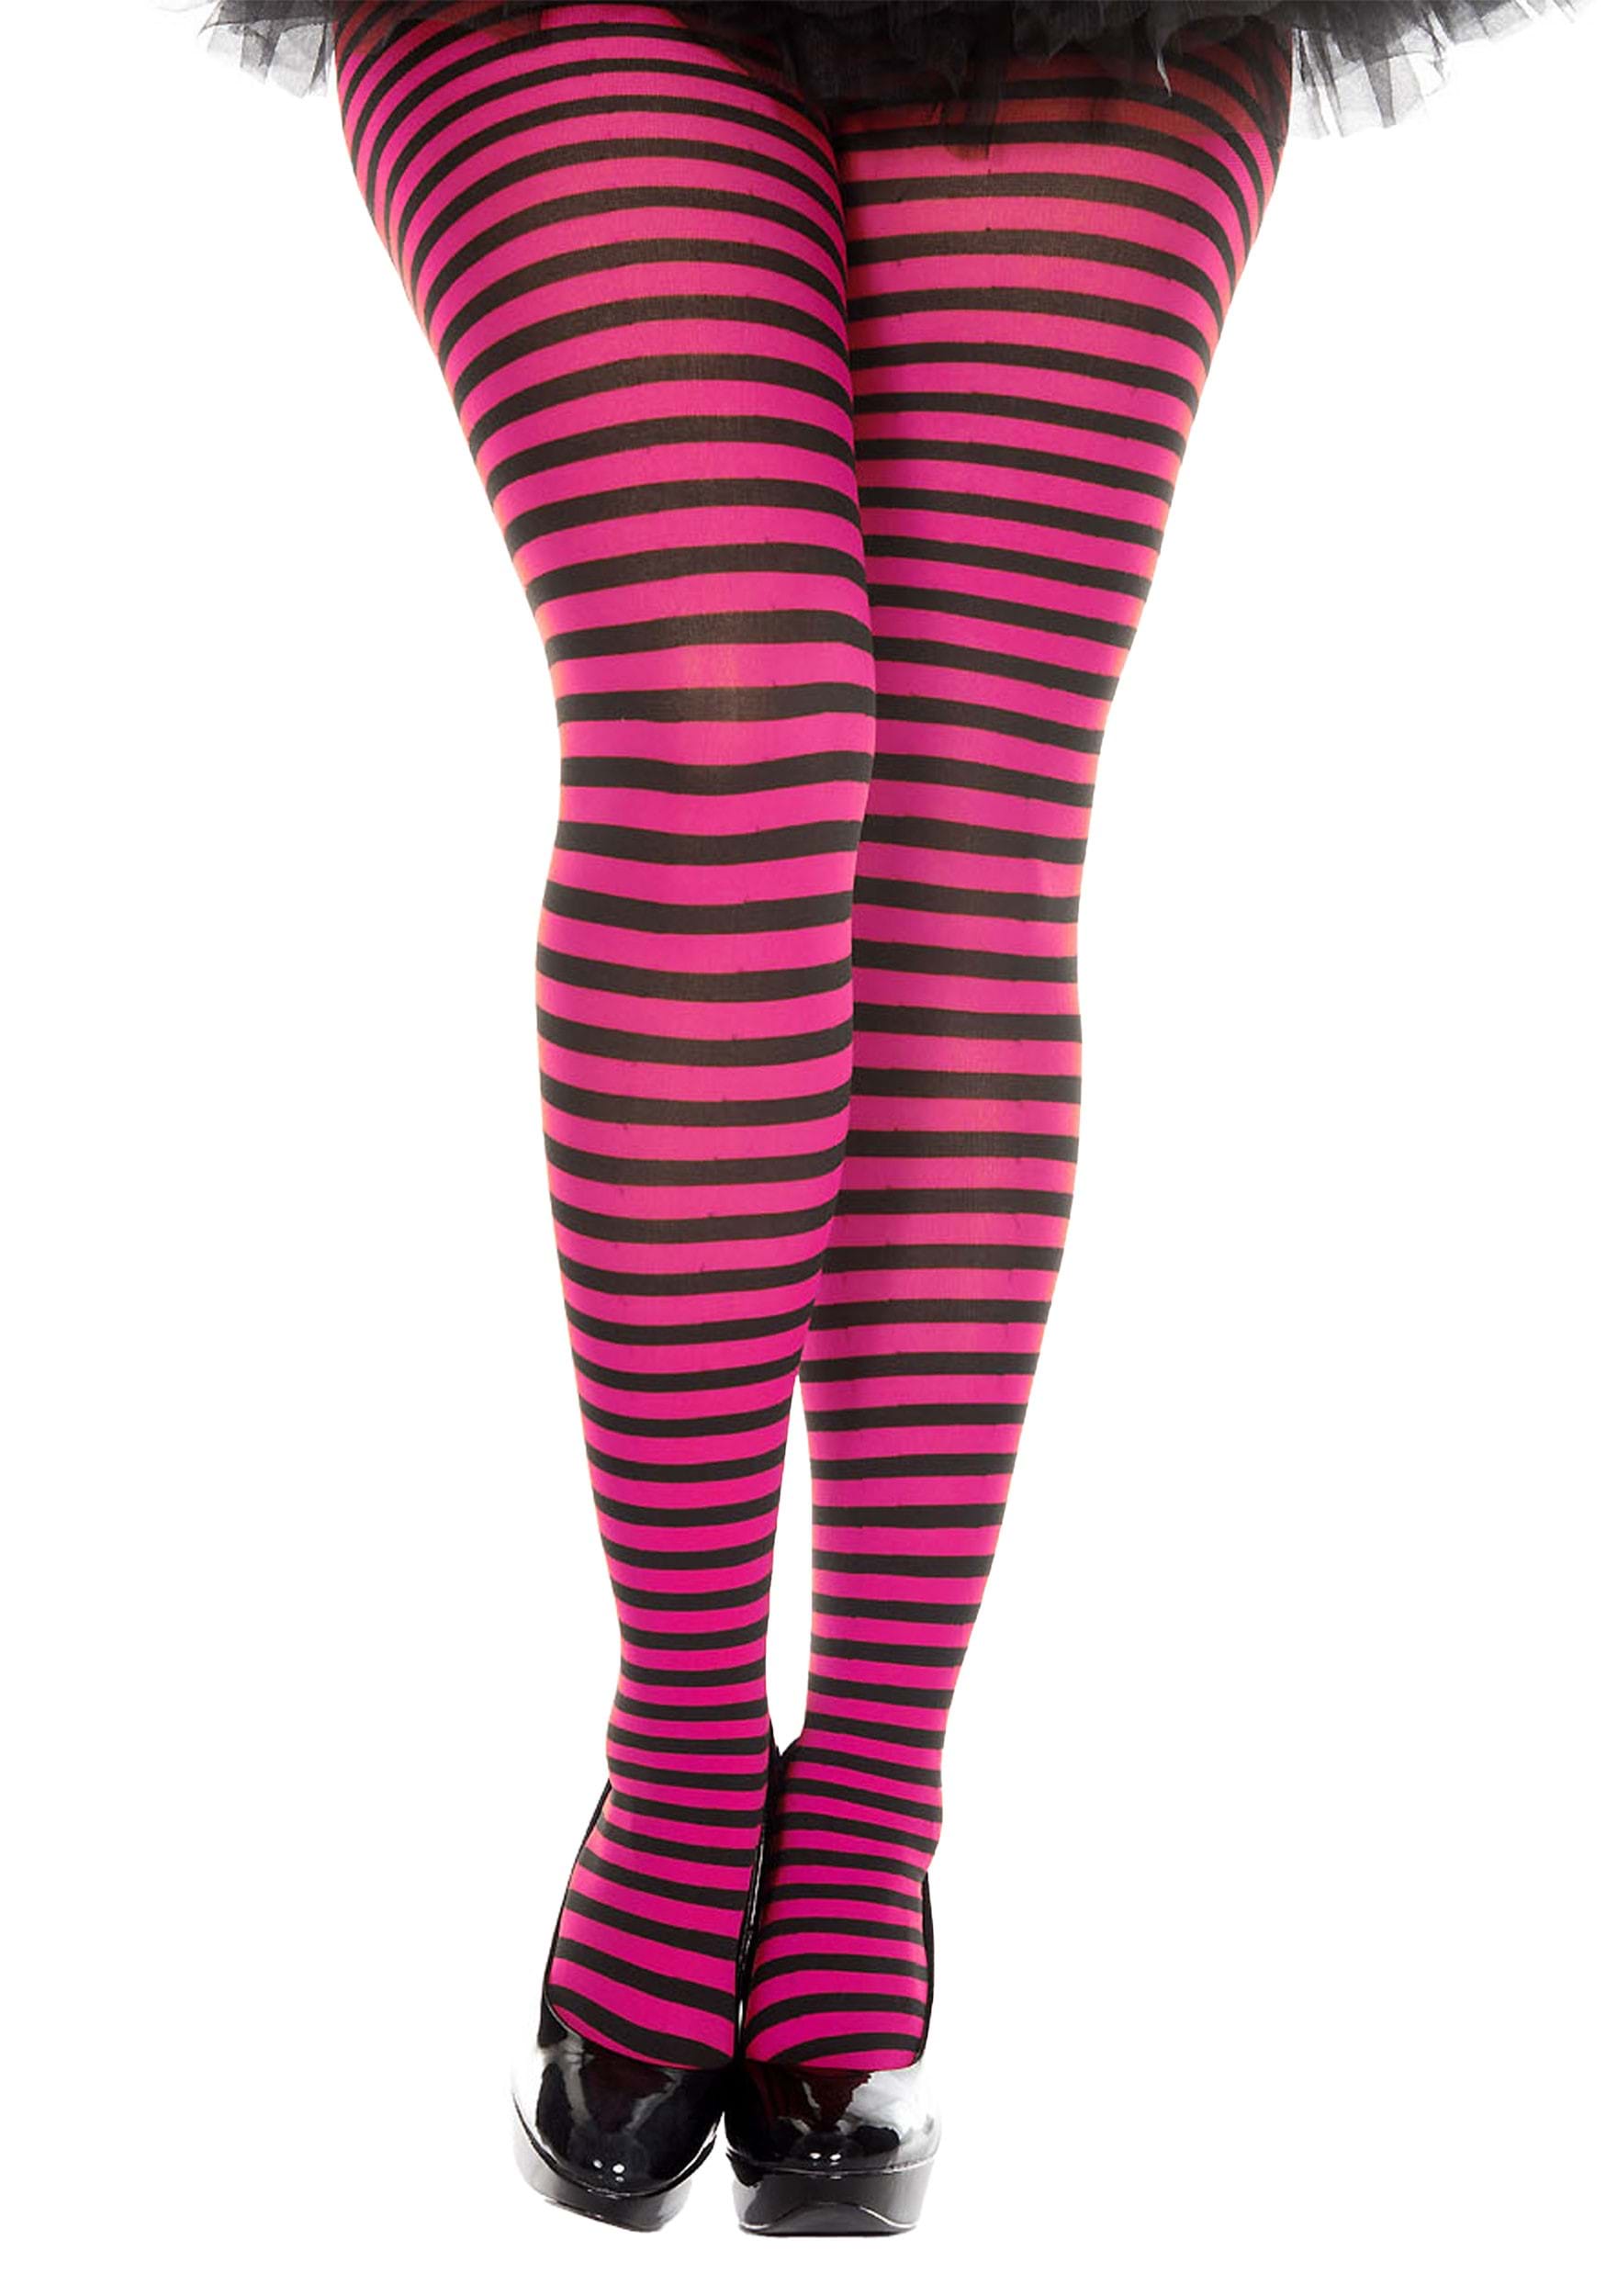 https://images.halloweencostumes.com/products/93392/1-1/womens-plus-size-black-hot-pink-striped-tights.jpg